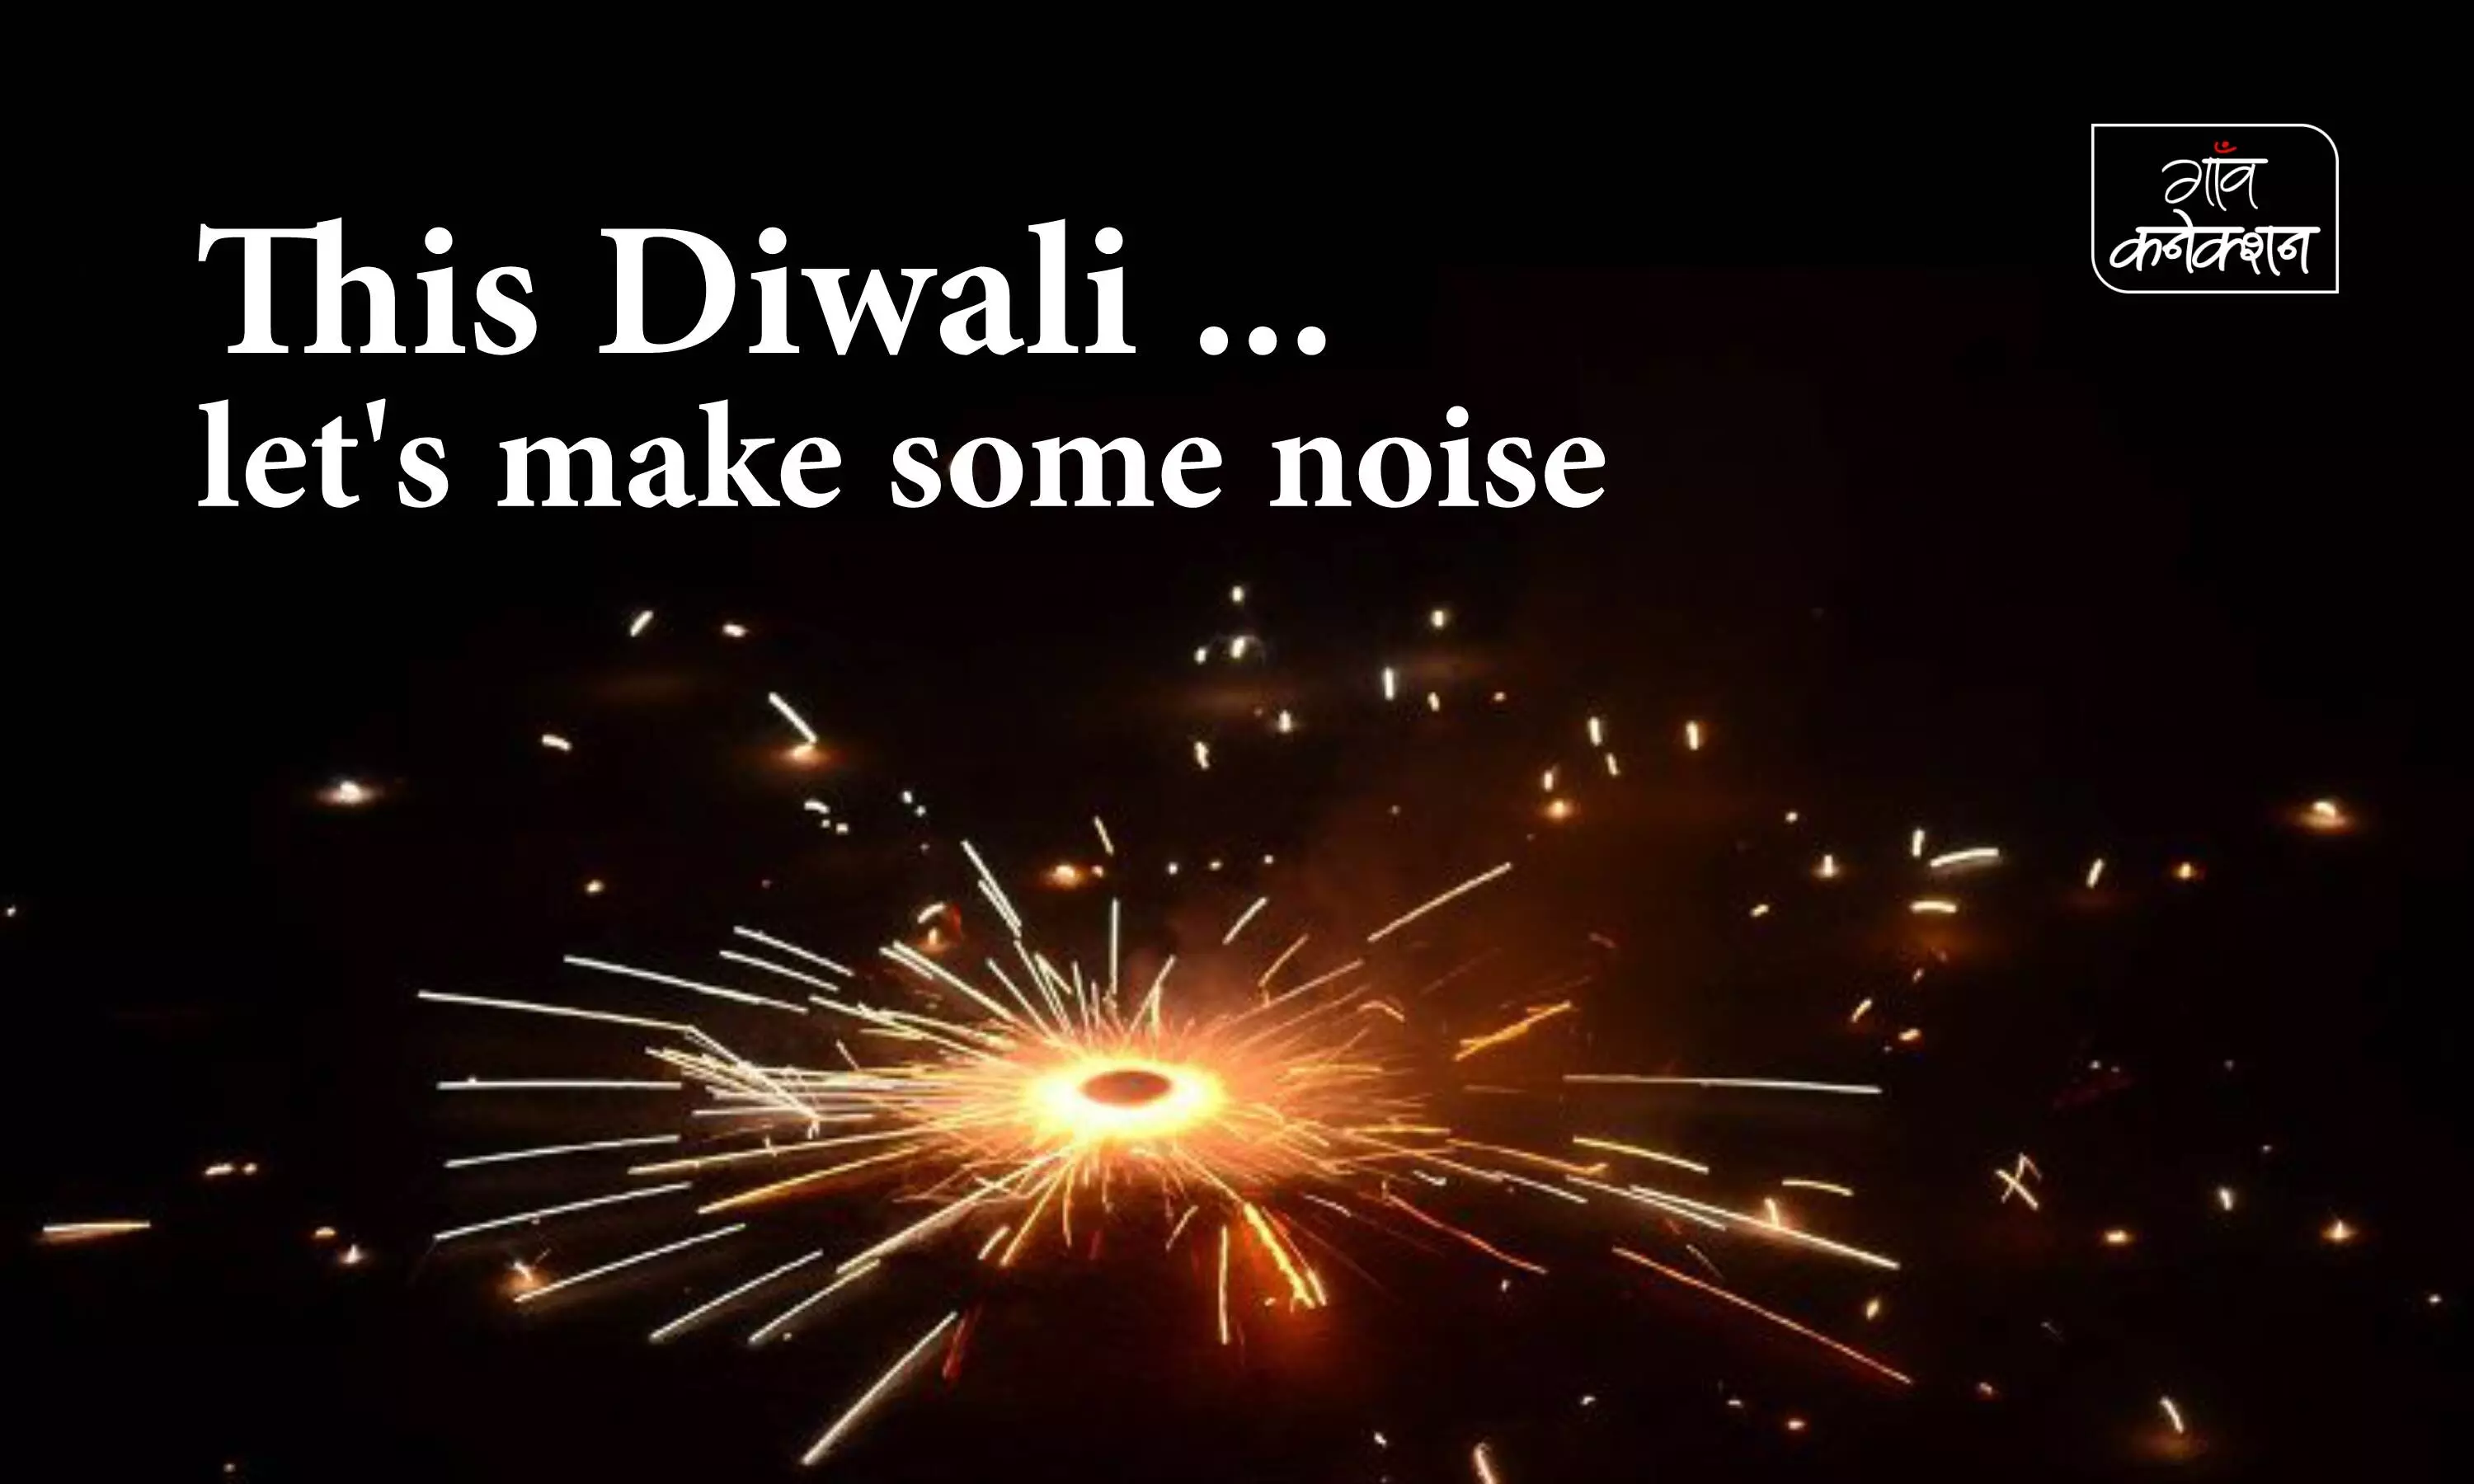 Diwali is a celebration of homecoming, coming to oneself